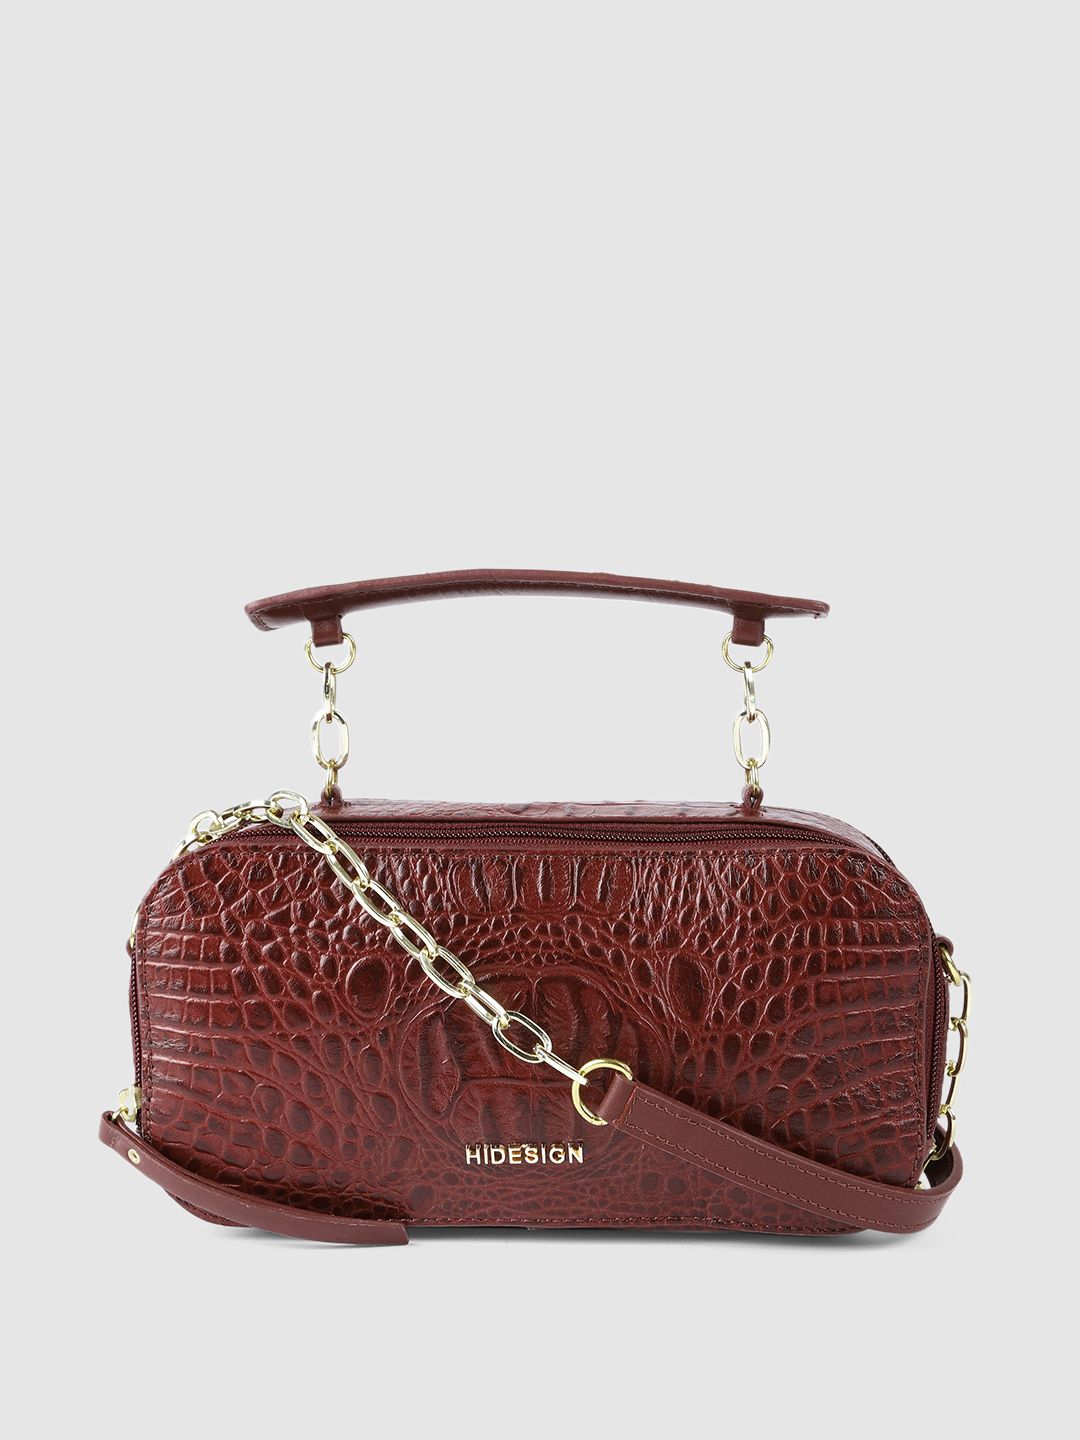 Hidesign Maroon Textured Leather Structured Handheld Bag Price in India